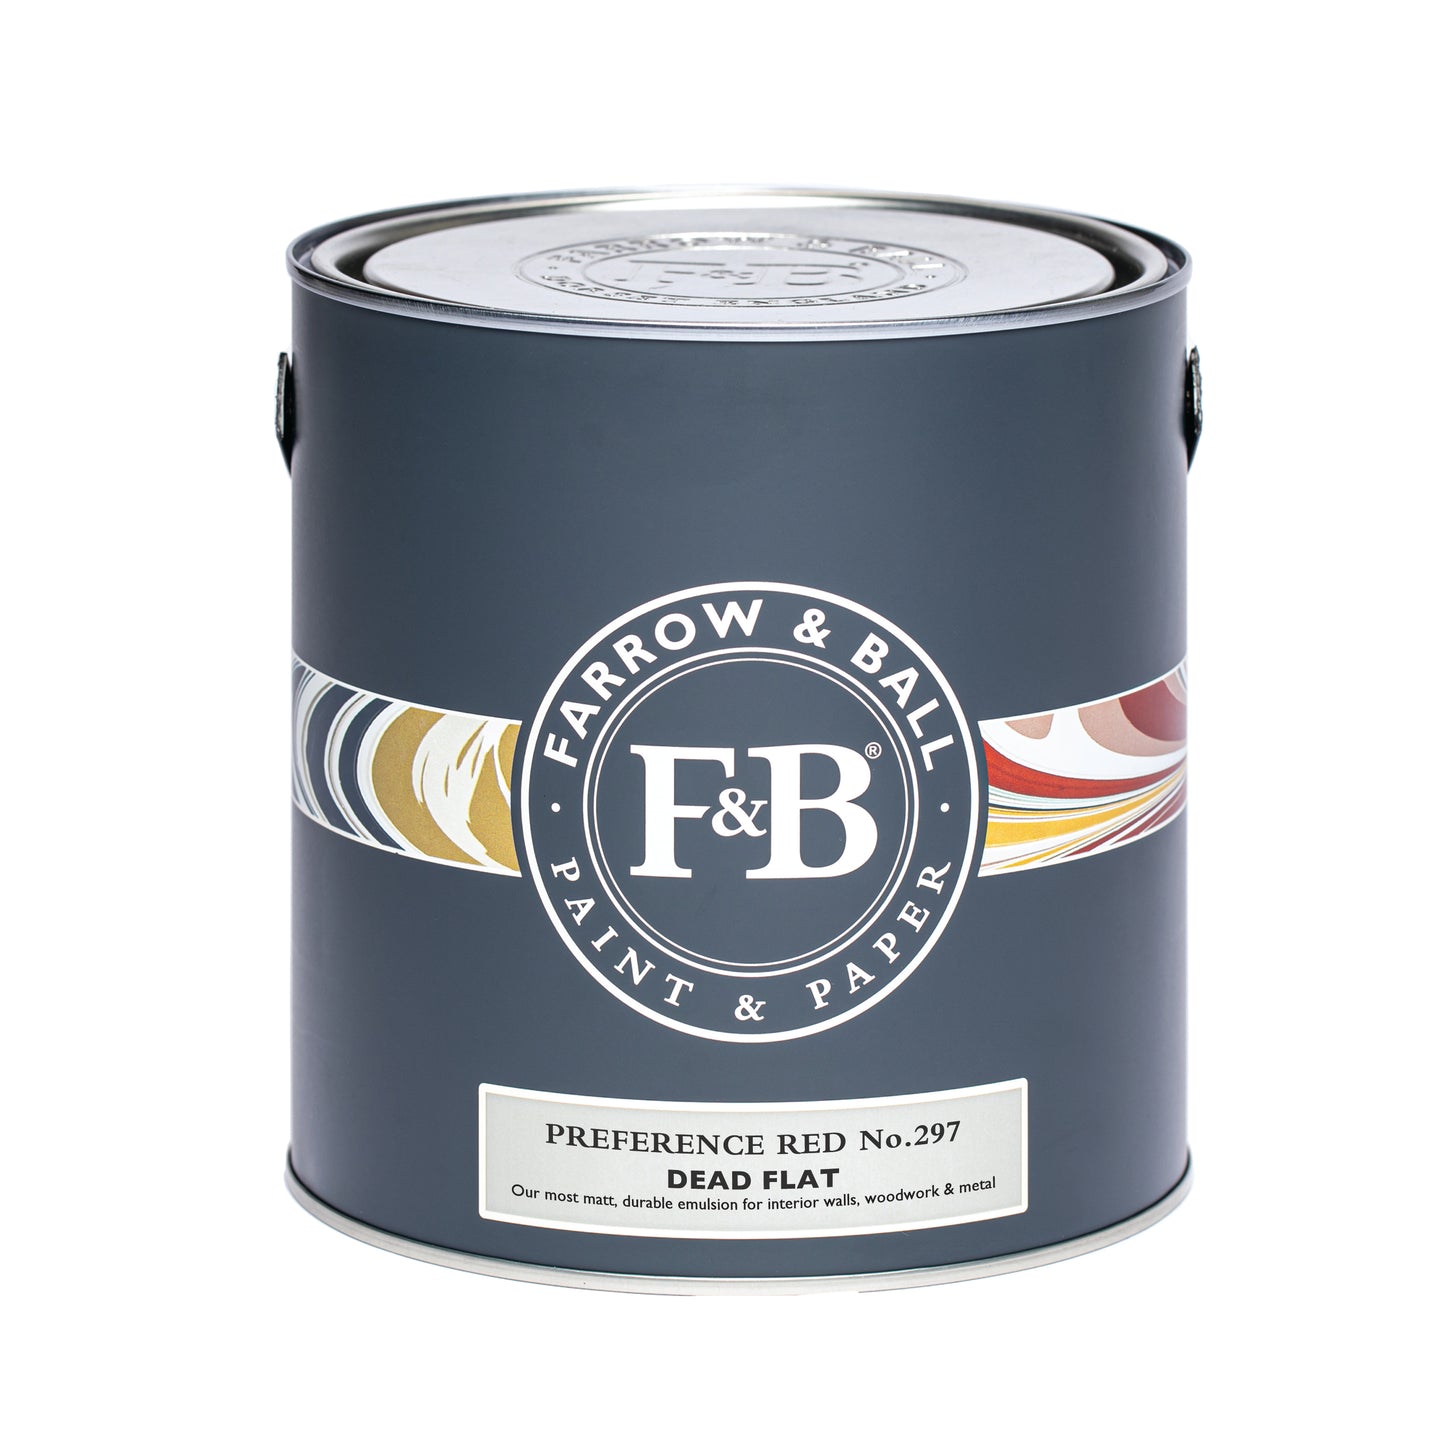 Preference Red 297 - Farrow and Ball - New Dead Flat